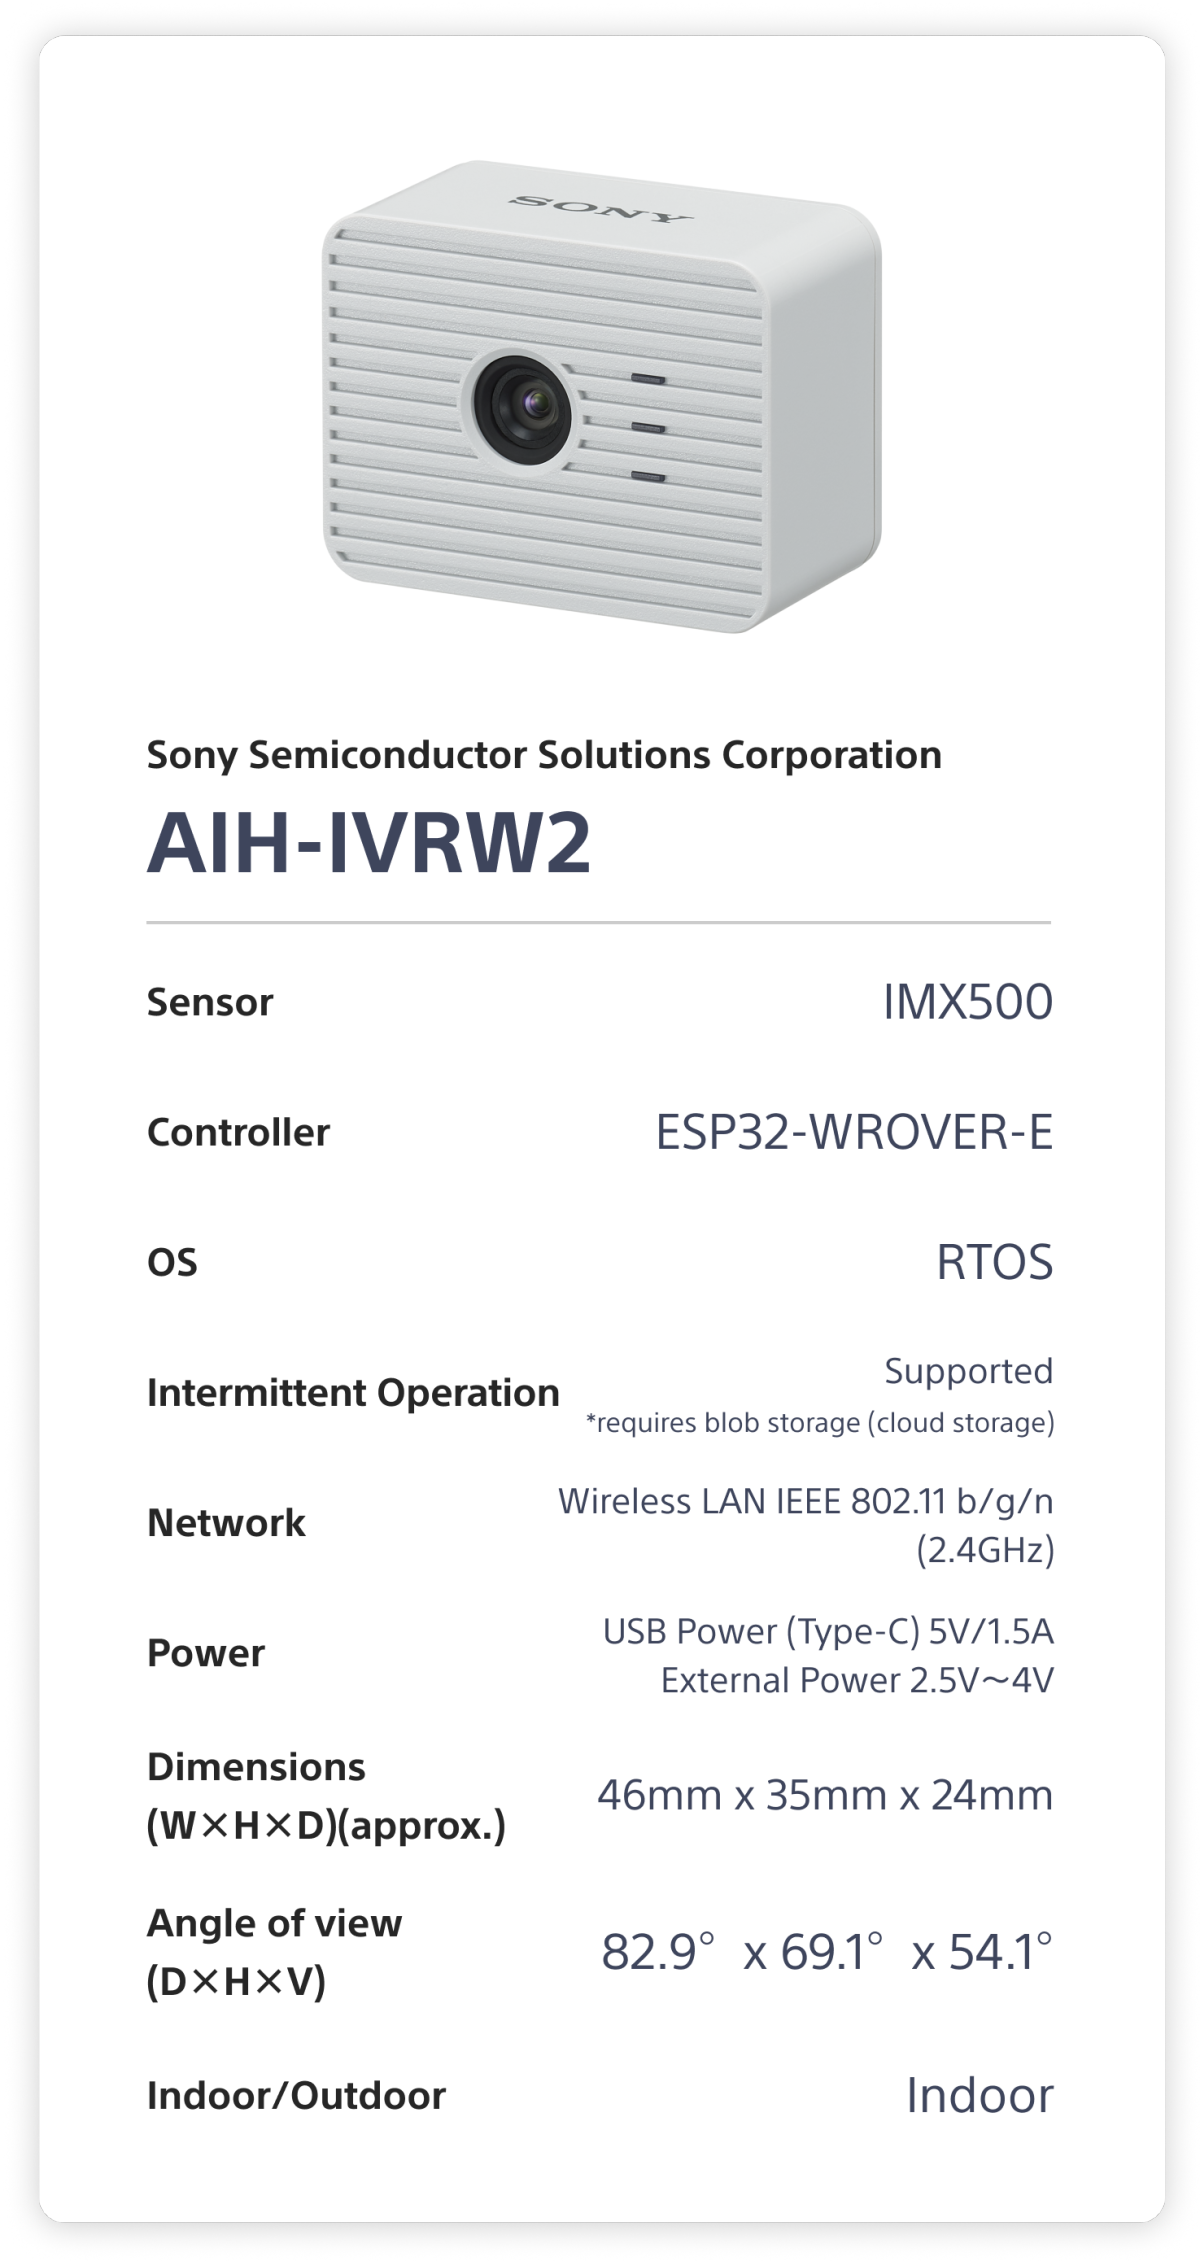 Sony Semiconductor Solutions Corporation AIH-IVRW2 Sensor: IMX500. Controller: ESP32-WROVER-E. OS: RTOS. Intermittent Operation: Supported (requires blob storage (cloud storage)). Network: Wireless LAN IEEE 802.11 b/g/n (2.4GHz). Power: USB Power (Type-C) 5V 1.5A, External Power 2.5V～4V. Dimensions (W×H×D)(approx.): 46mm x 35mm x 24mm. Angle of view (D×H×V): 82.9°x 69.1°x 54.1°. Indoor/Outdoor: Indoor.